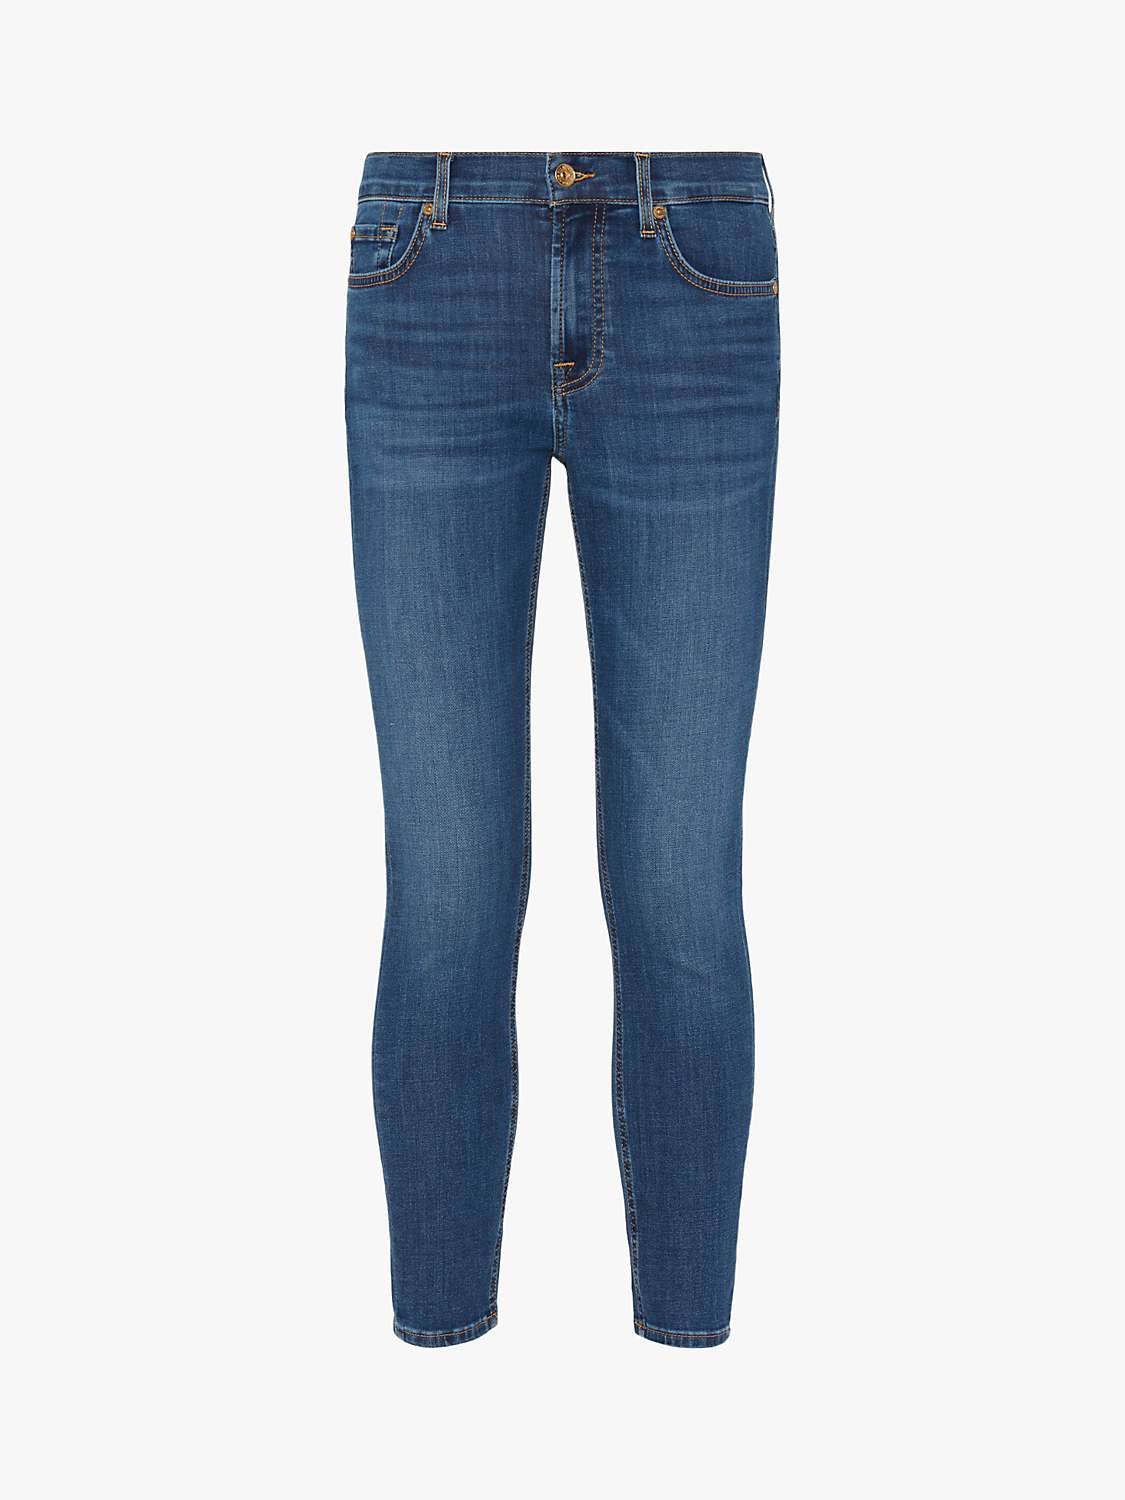 Buy 7 For All Mankind Skinny B(Air) Jeans, Duchess Online at johnlewis.com